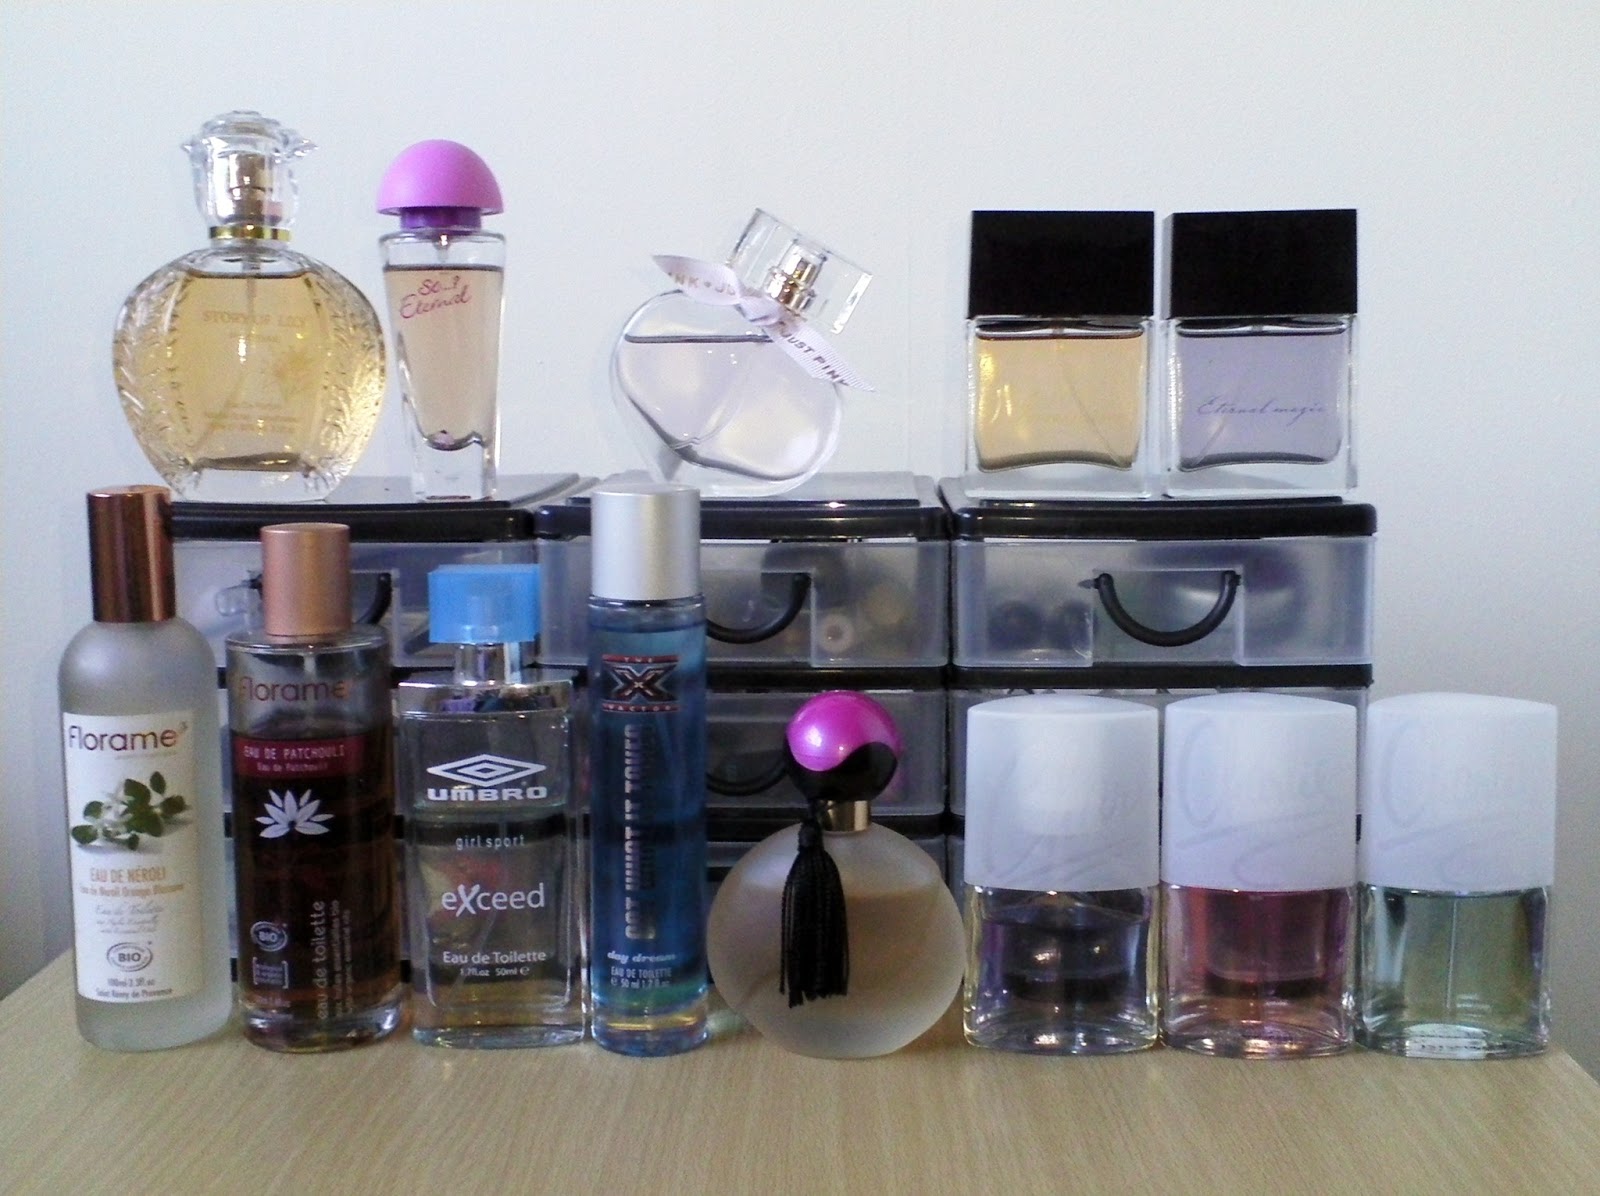 My collection. Any suggestions?☺️ : Perfumes